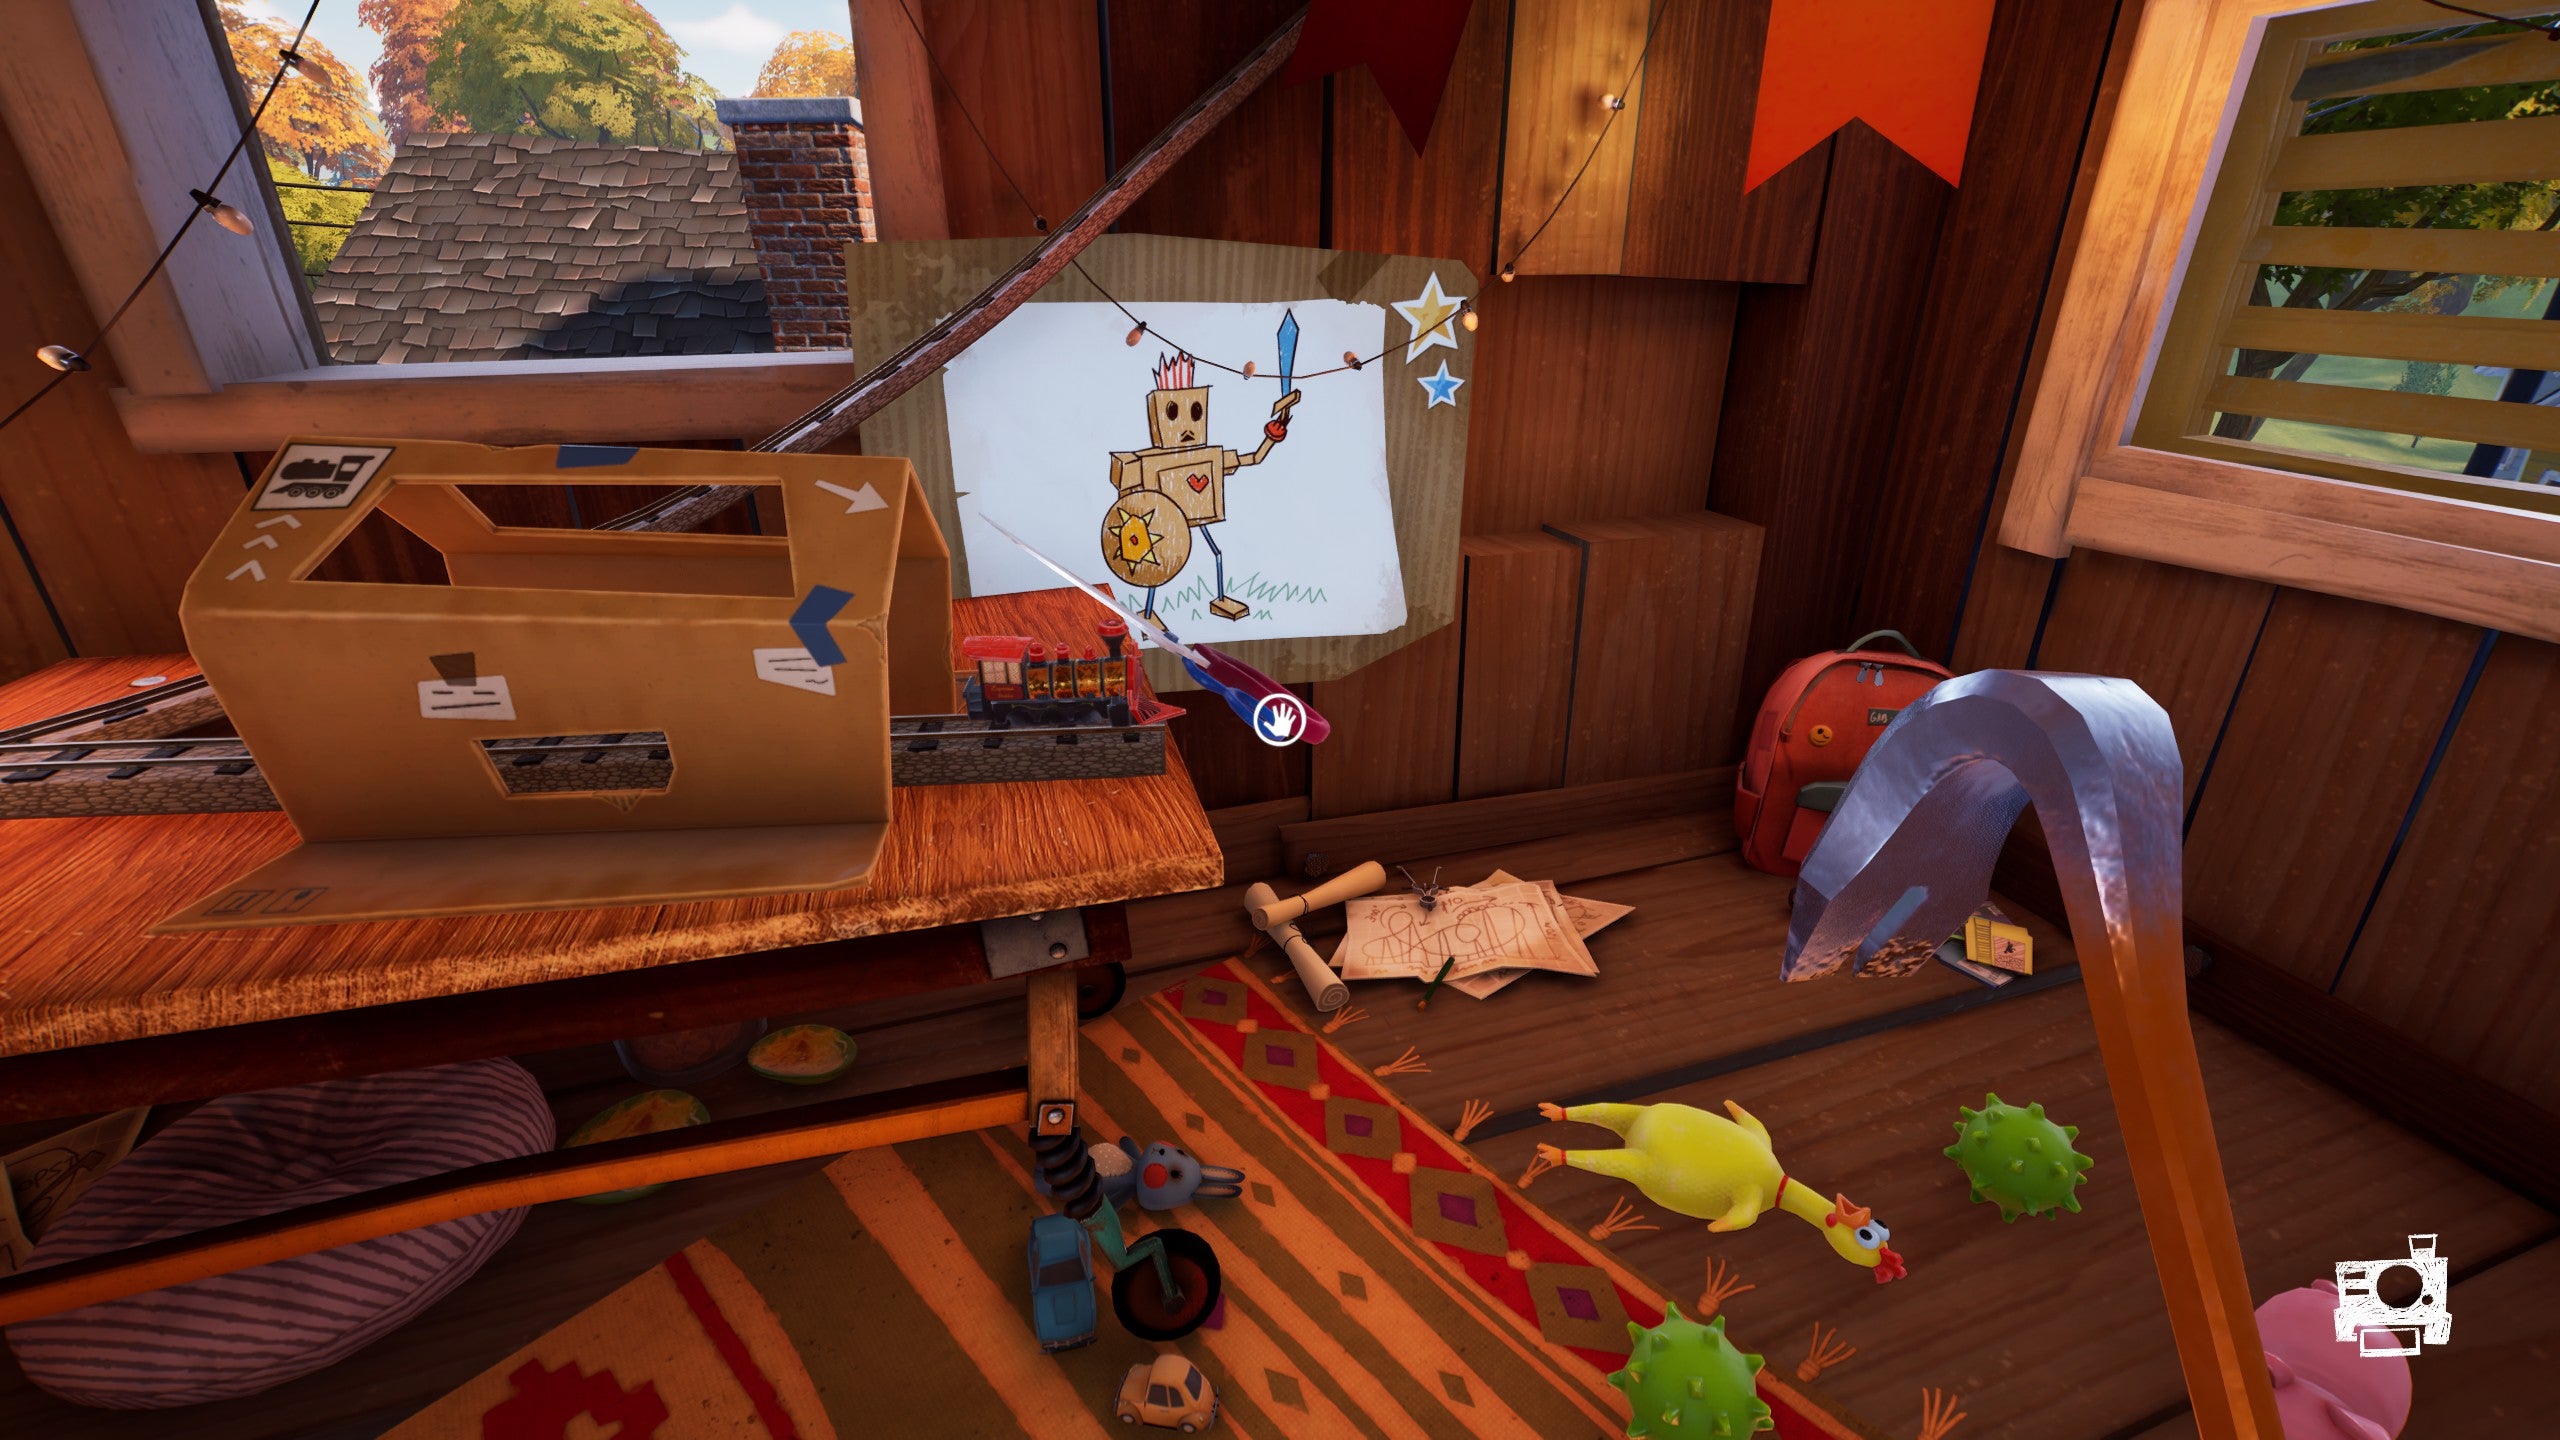 Solving the train puzzle in the tree house in Hello Neighbor 2 to get some scissors